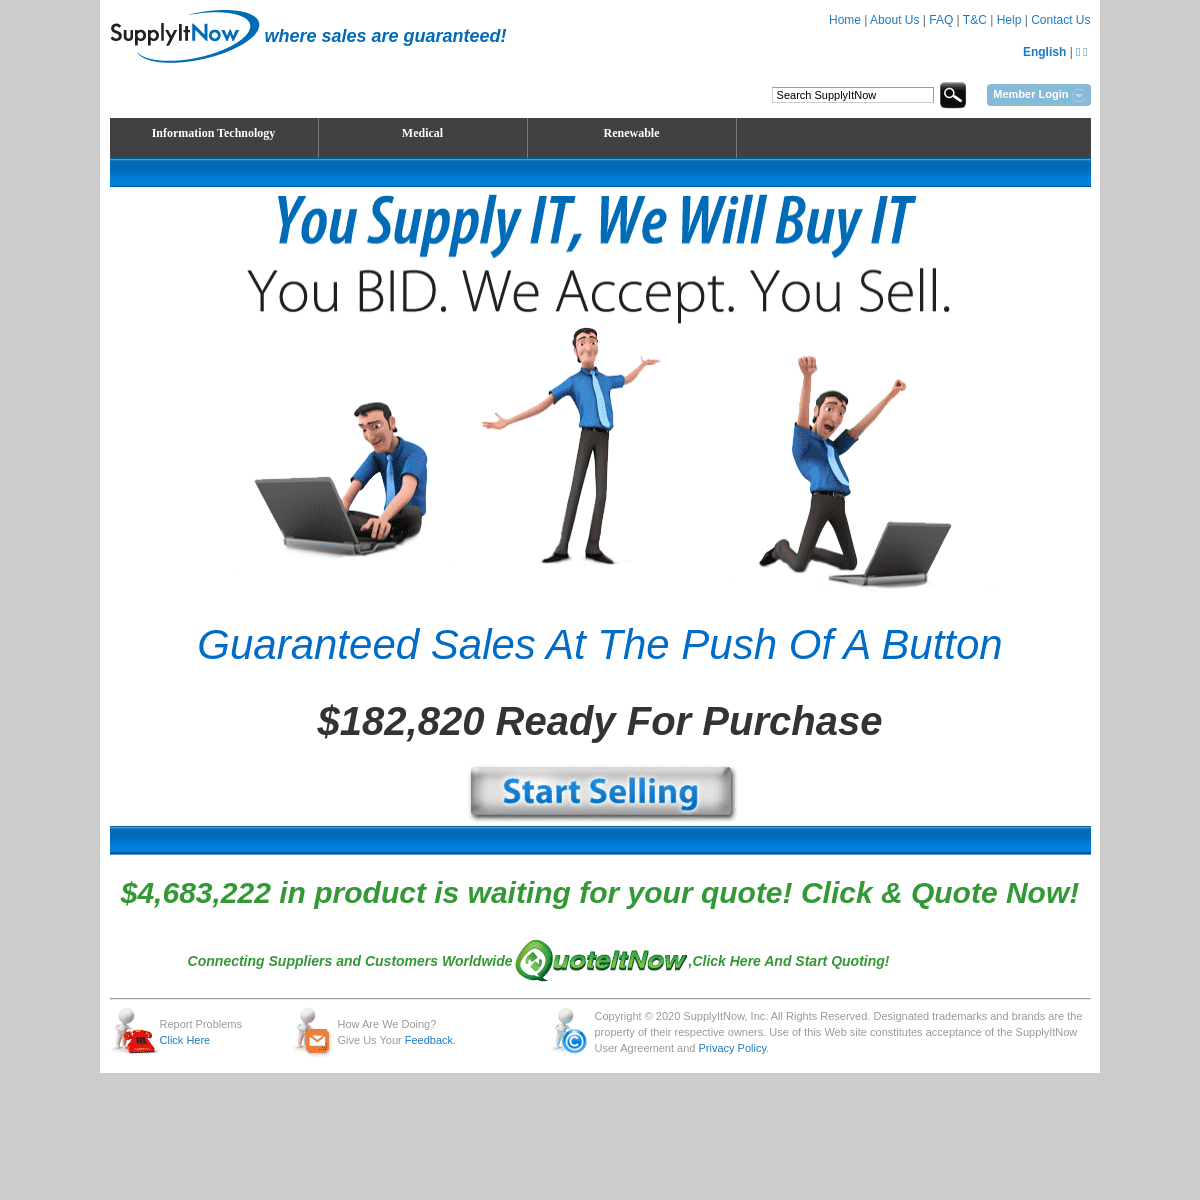 A complete backup of supplyitnow.com